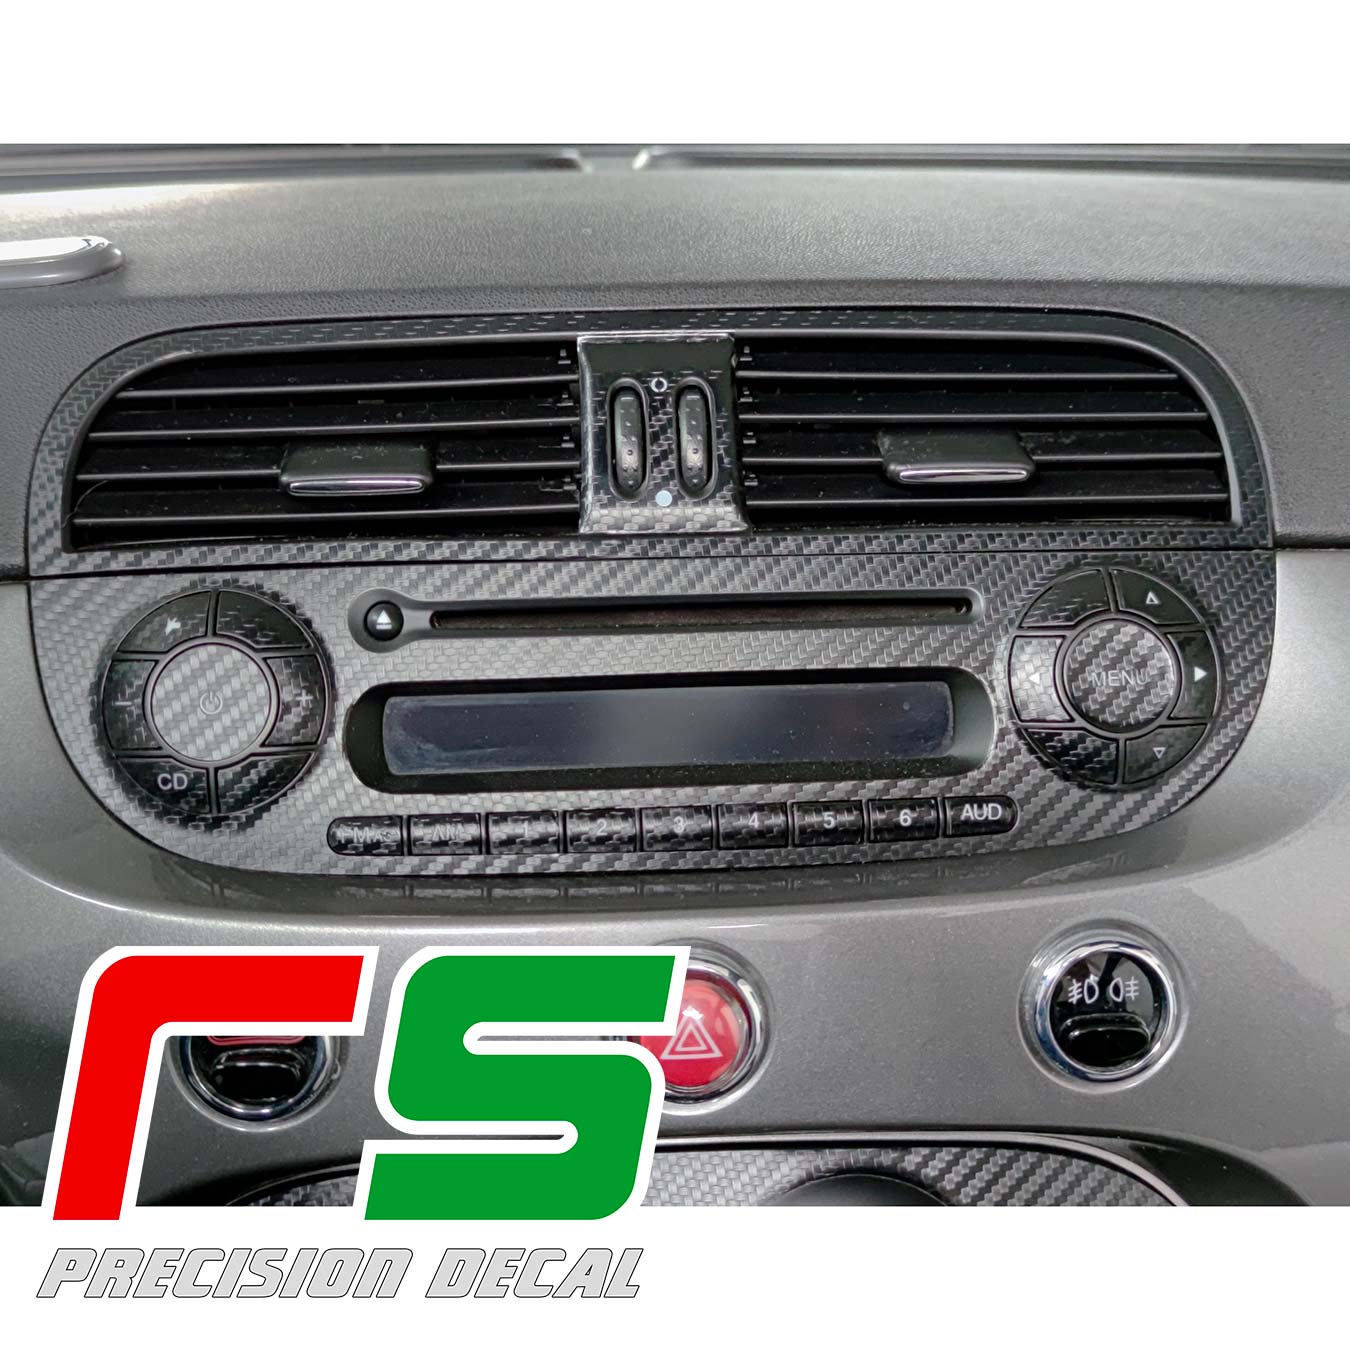 stickers Fiat 500 abarth Decal carbonlook stereo radio